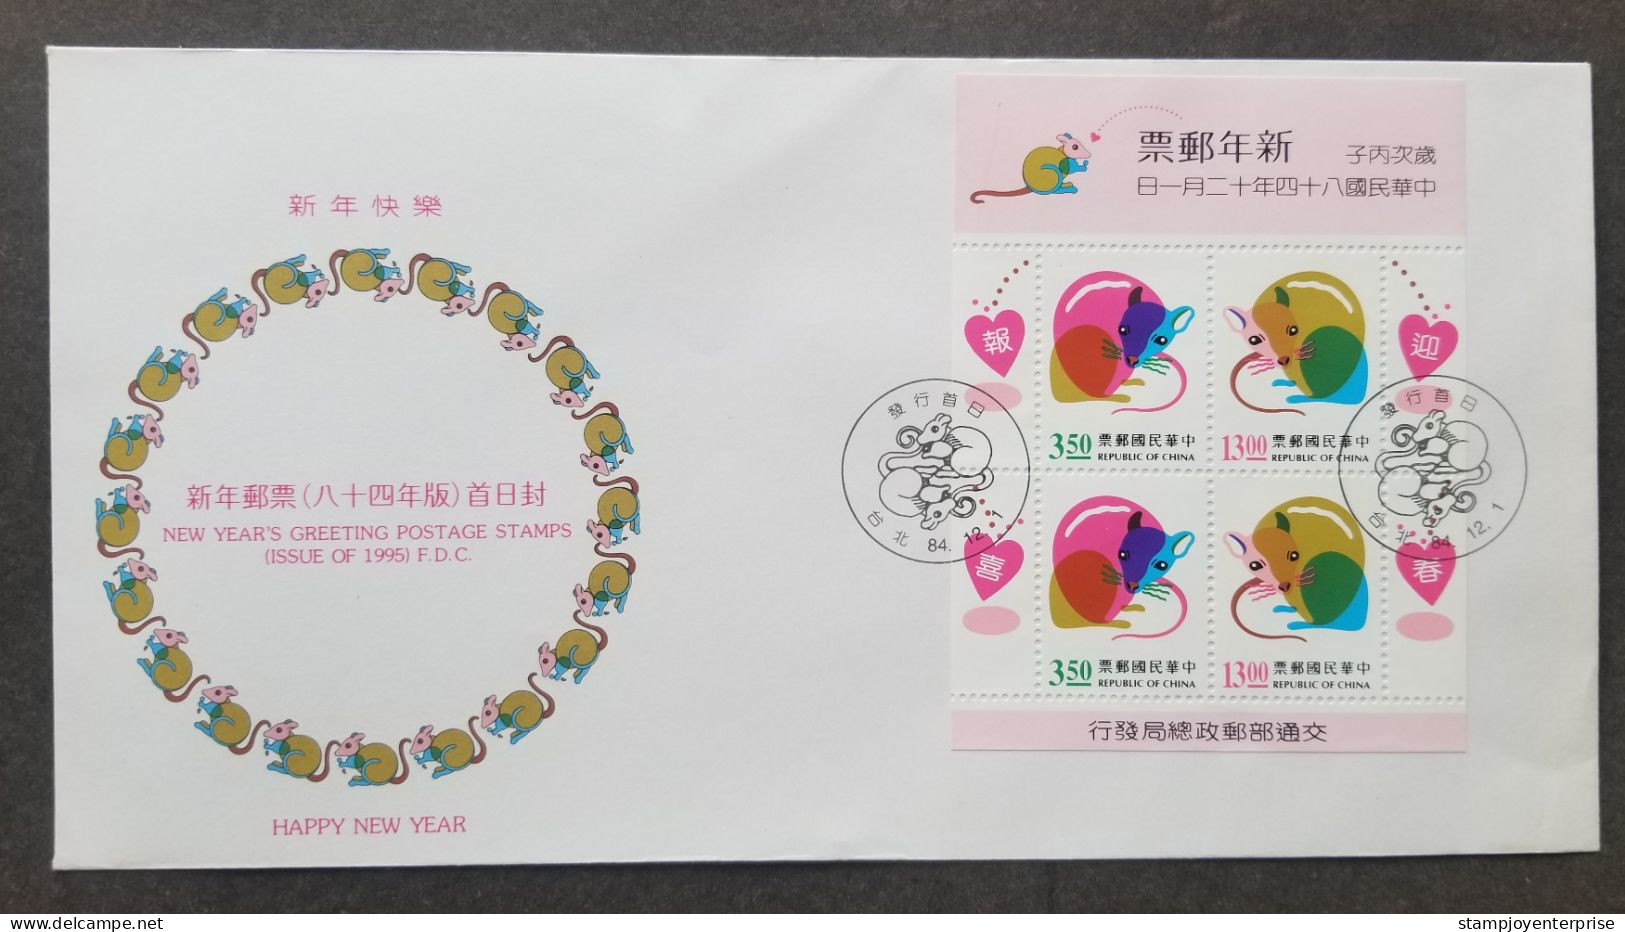 Taiwan Year Of The Rat 1995 Chinese Lunar Zodiac Greeting (miniature FDC) *see Scan - Storia Postale